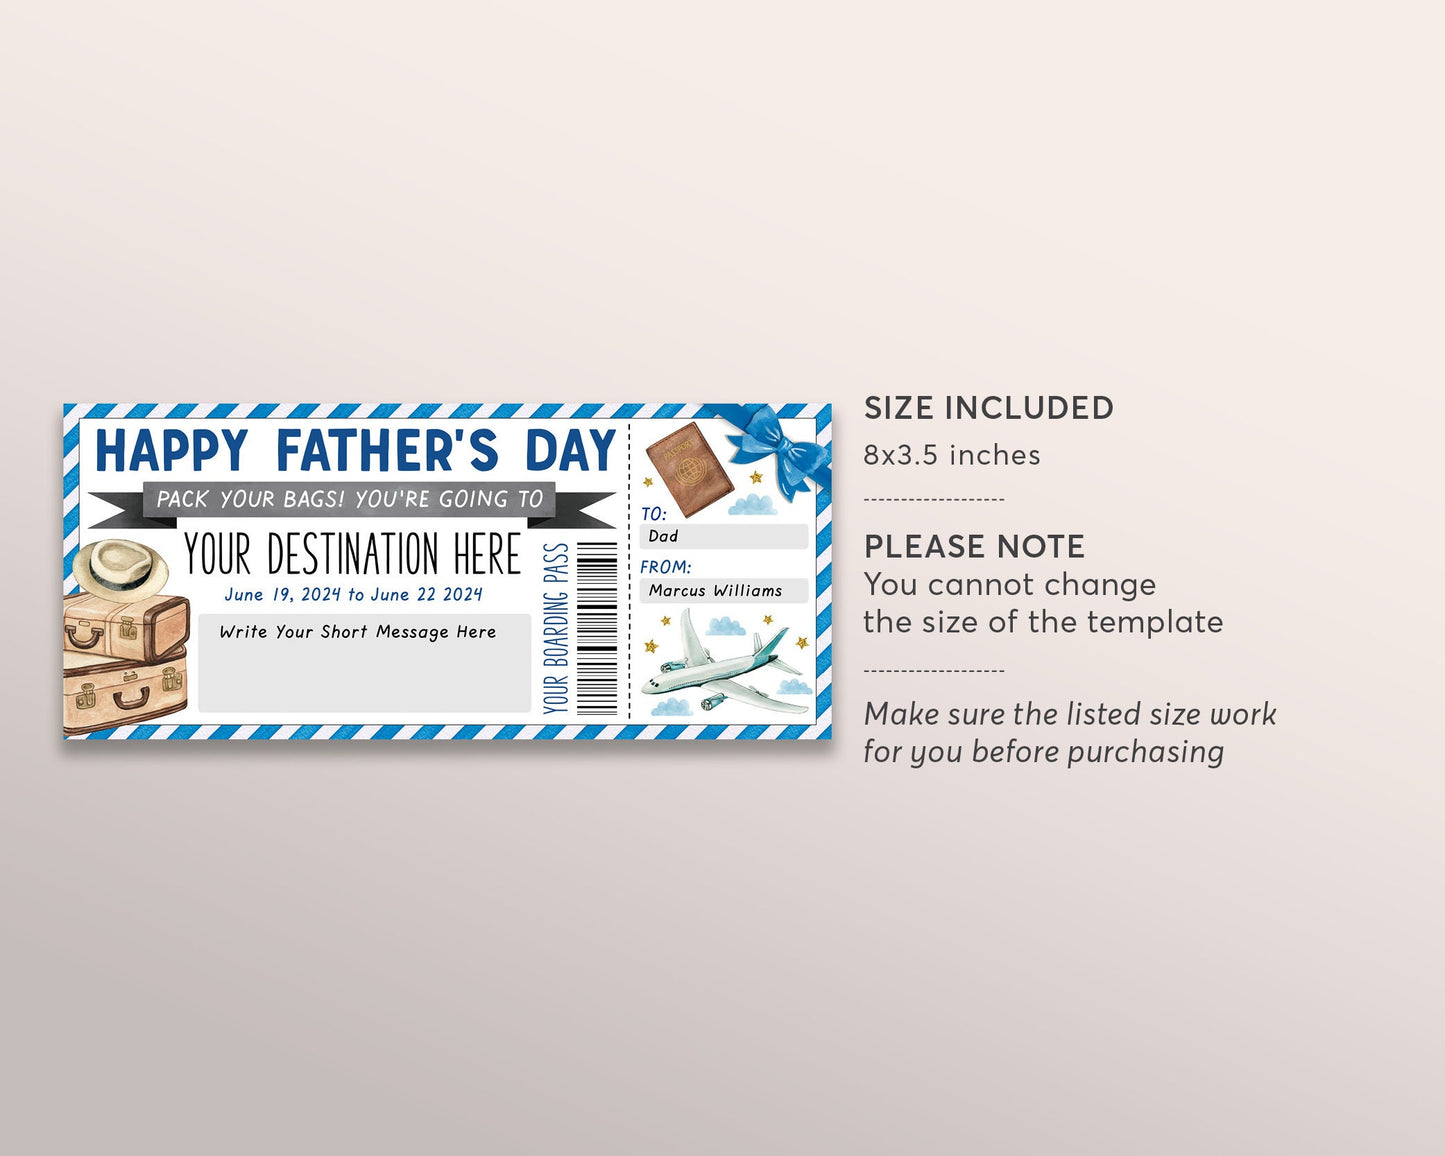 Fathers Day Surprise Boarding Pass Editable Template, Vacation Travel Plane Ticket Voucher For Dad, Trip Flight Destination Certificate